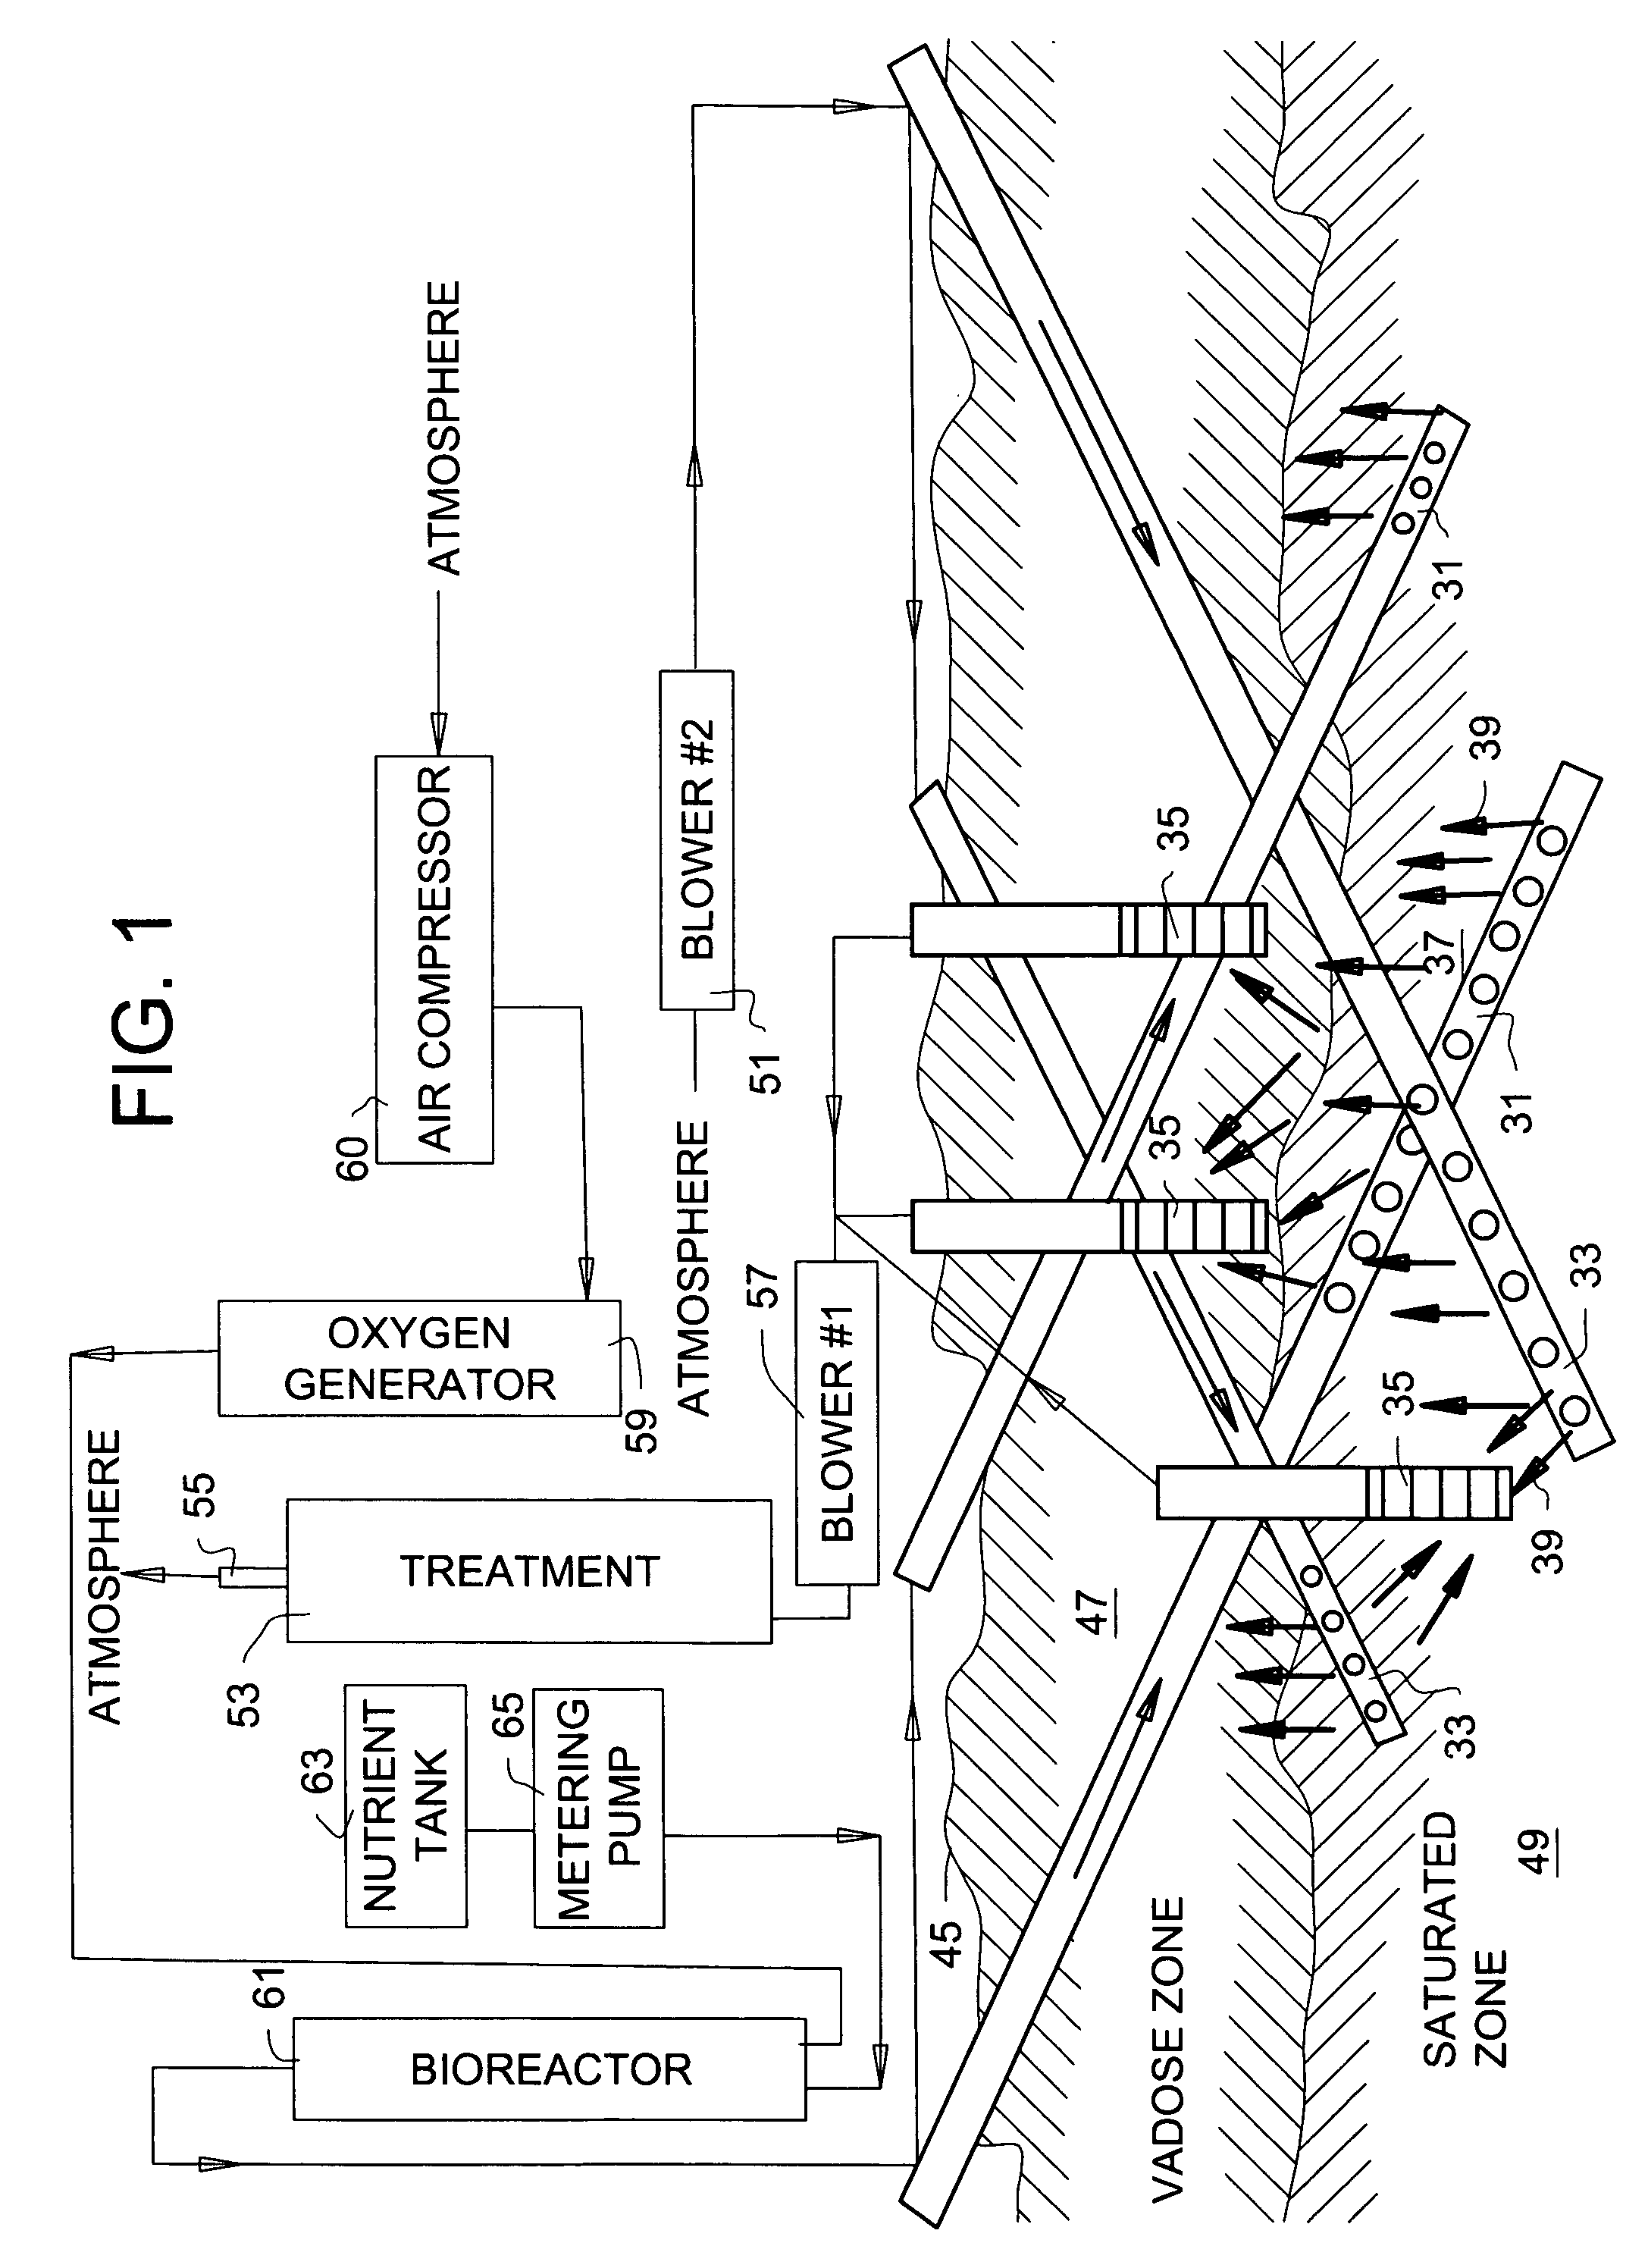 System and method for decontamination of contaminated soil in the vadose zone and/or groundwater